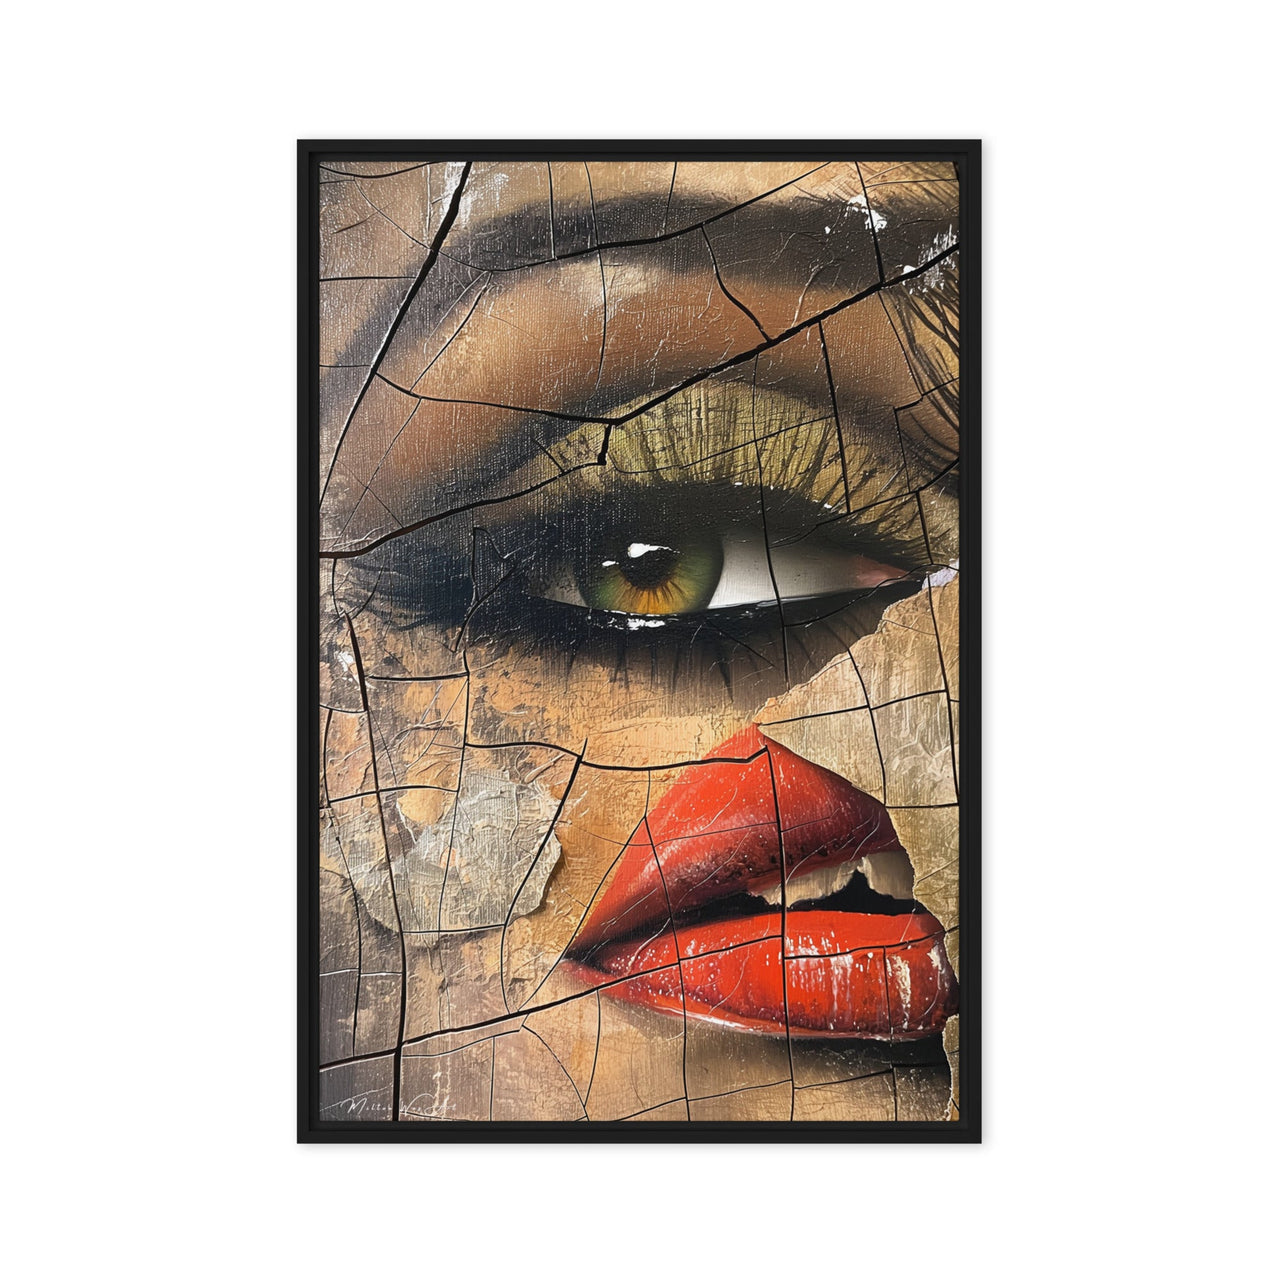 Intriguing framed canvas print from Milton Wes Art, depicting an up-close, textured portrayal of a woman's eye and lips, set in a chic room with modern decor, available at miltonwesart.com, Harlem NYC